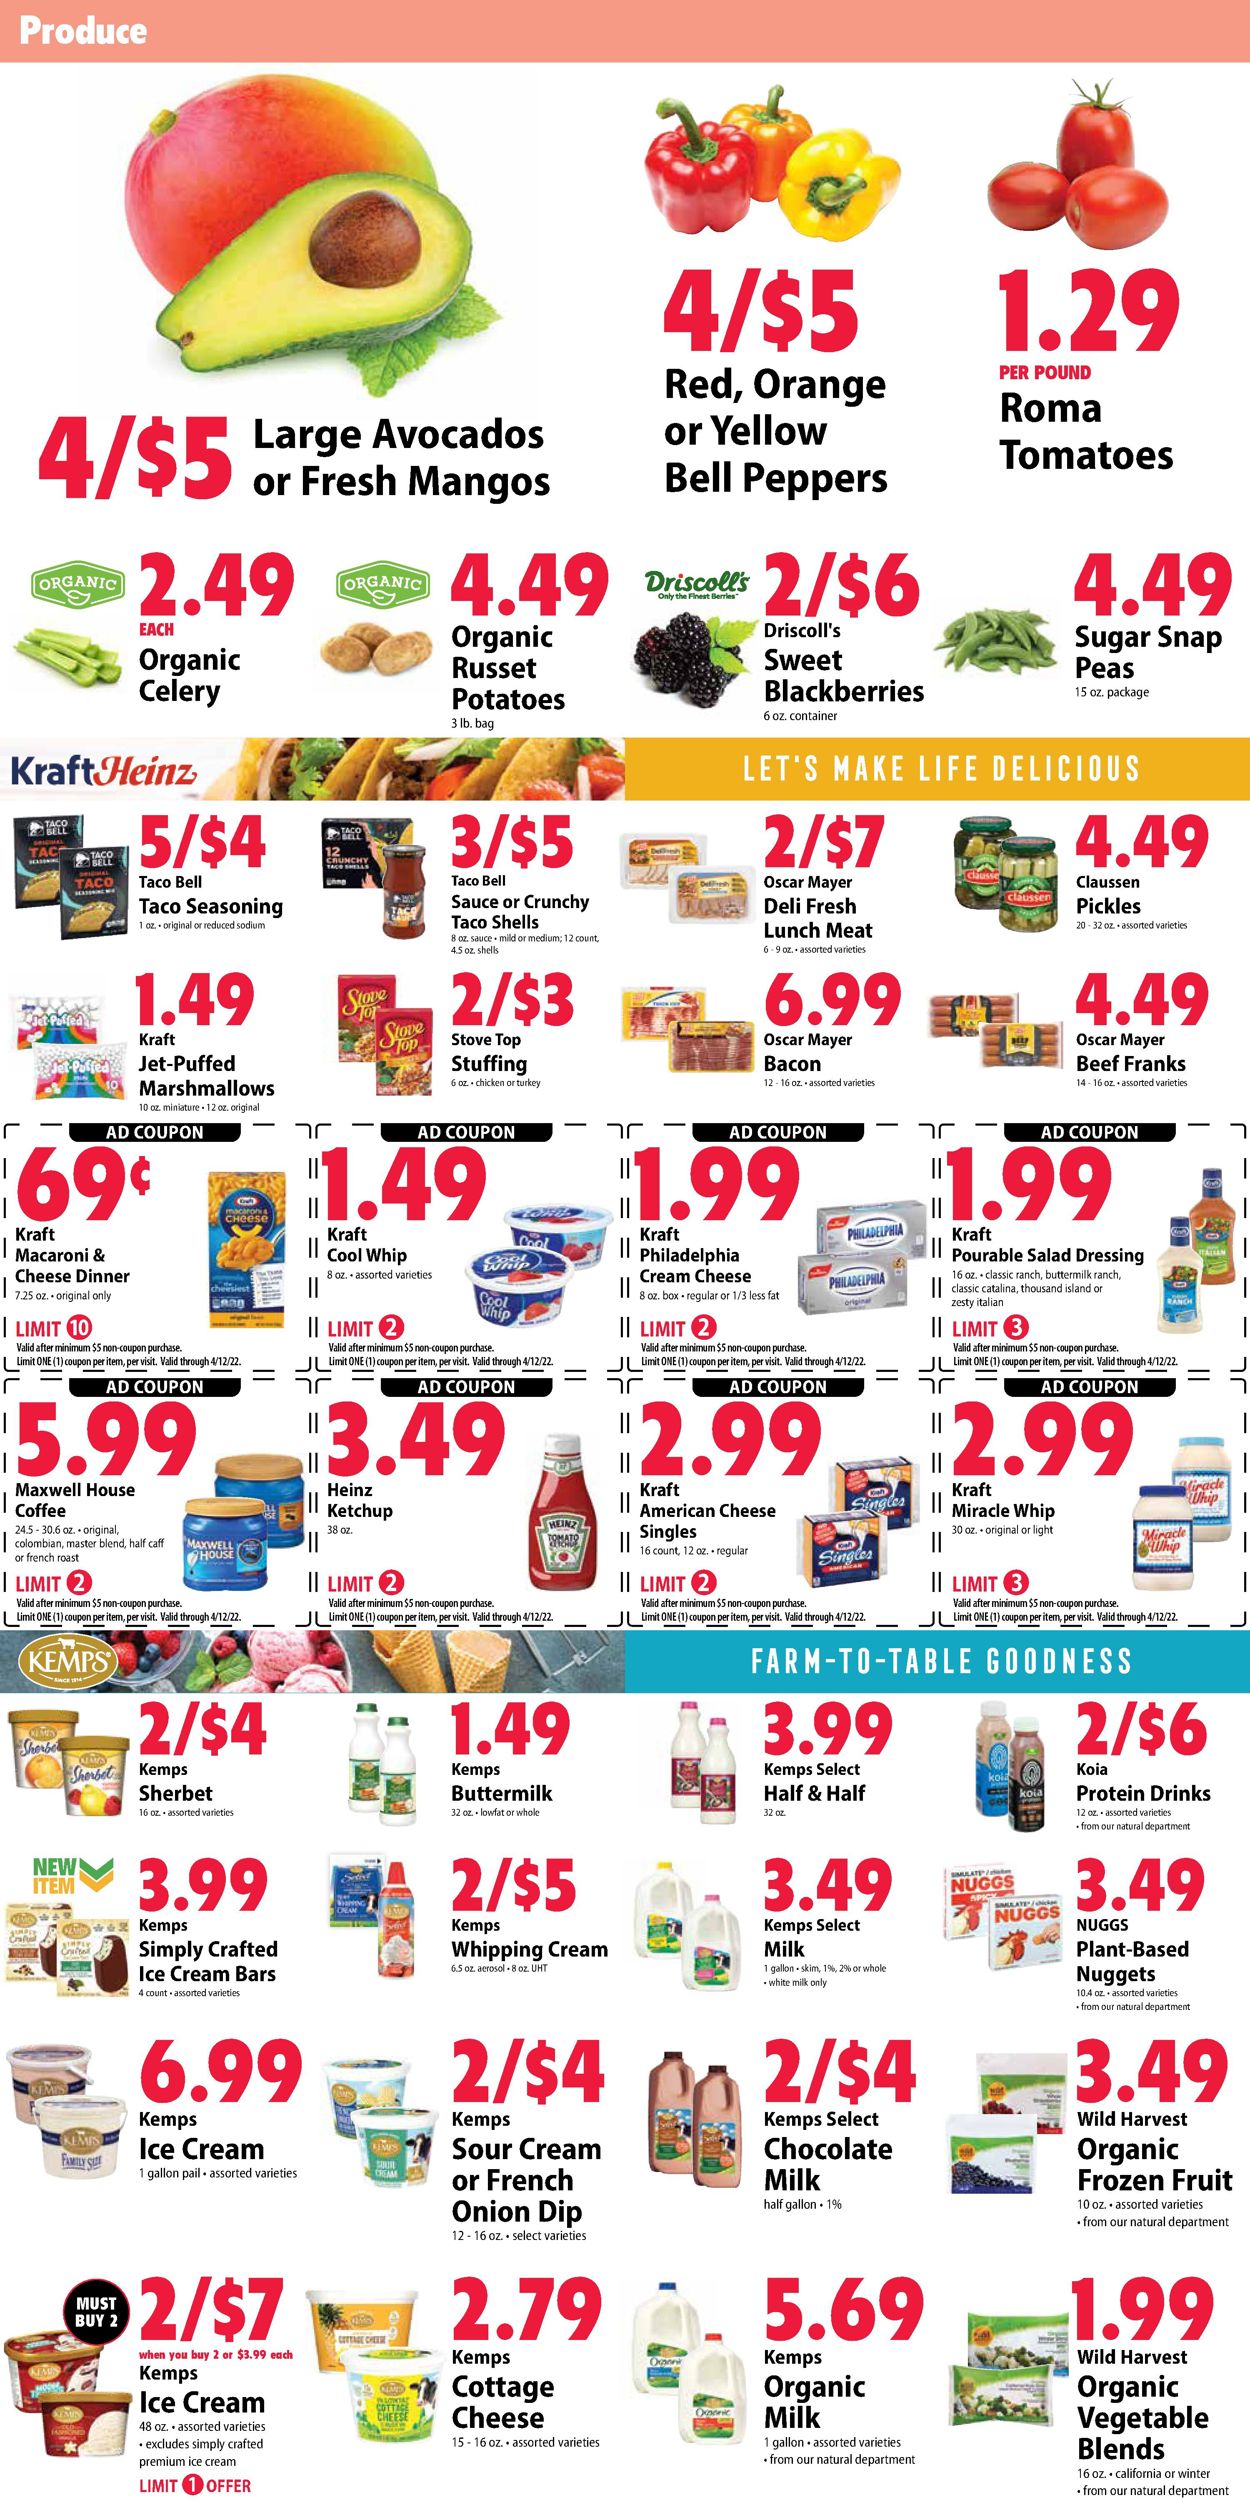 Festival Foods EASTER 2022 Weekly Ad Circular - valid 04/06-04/12/2022 (Page 4)